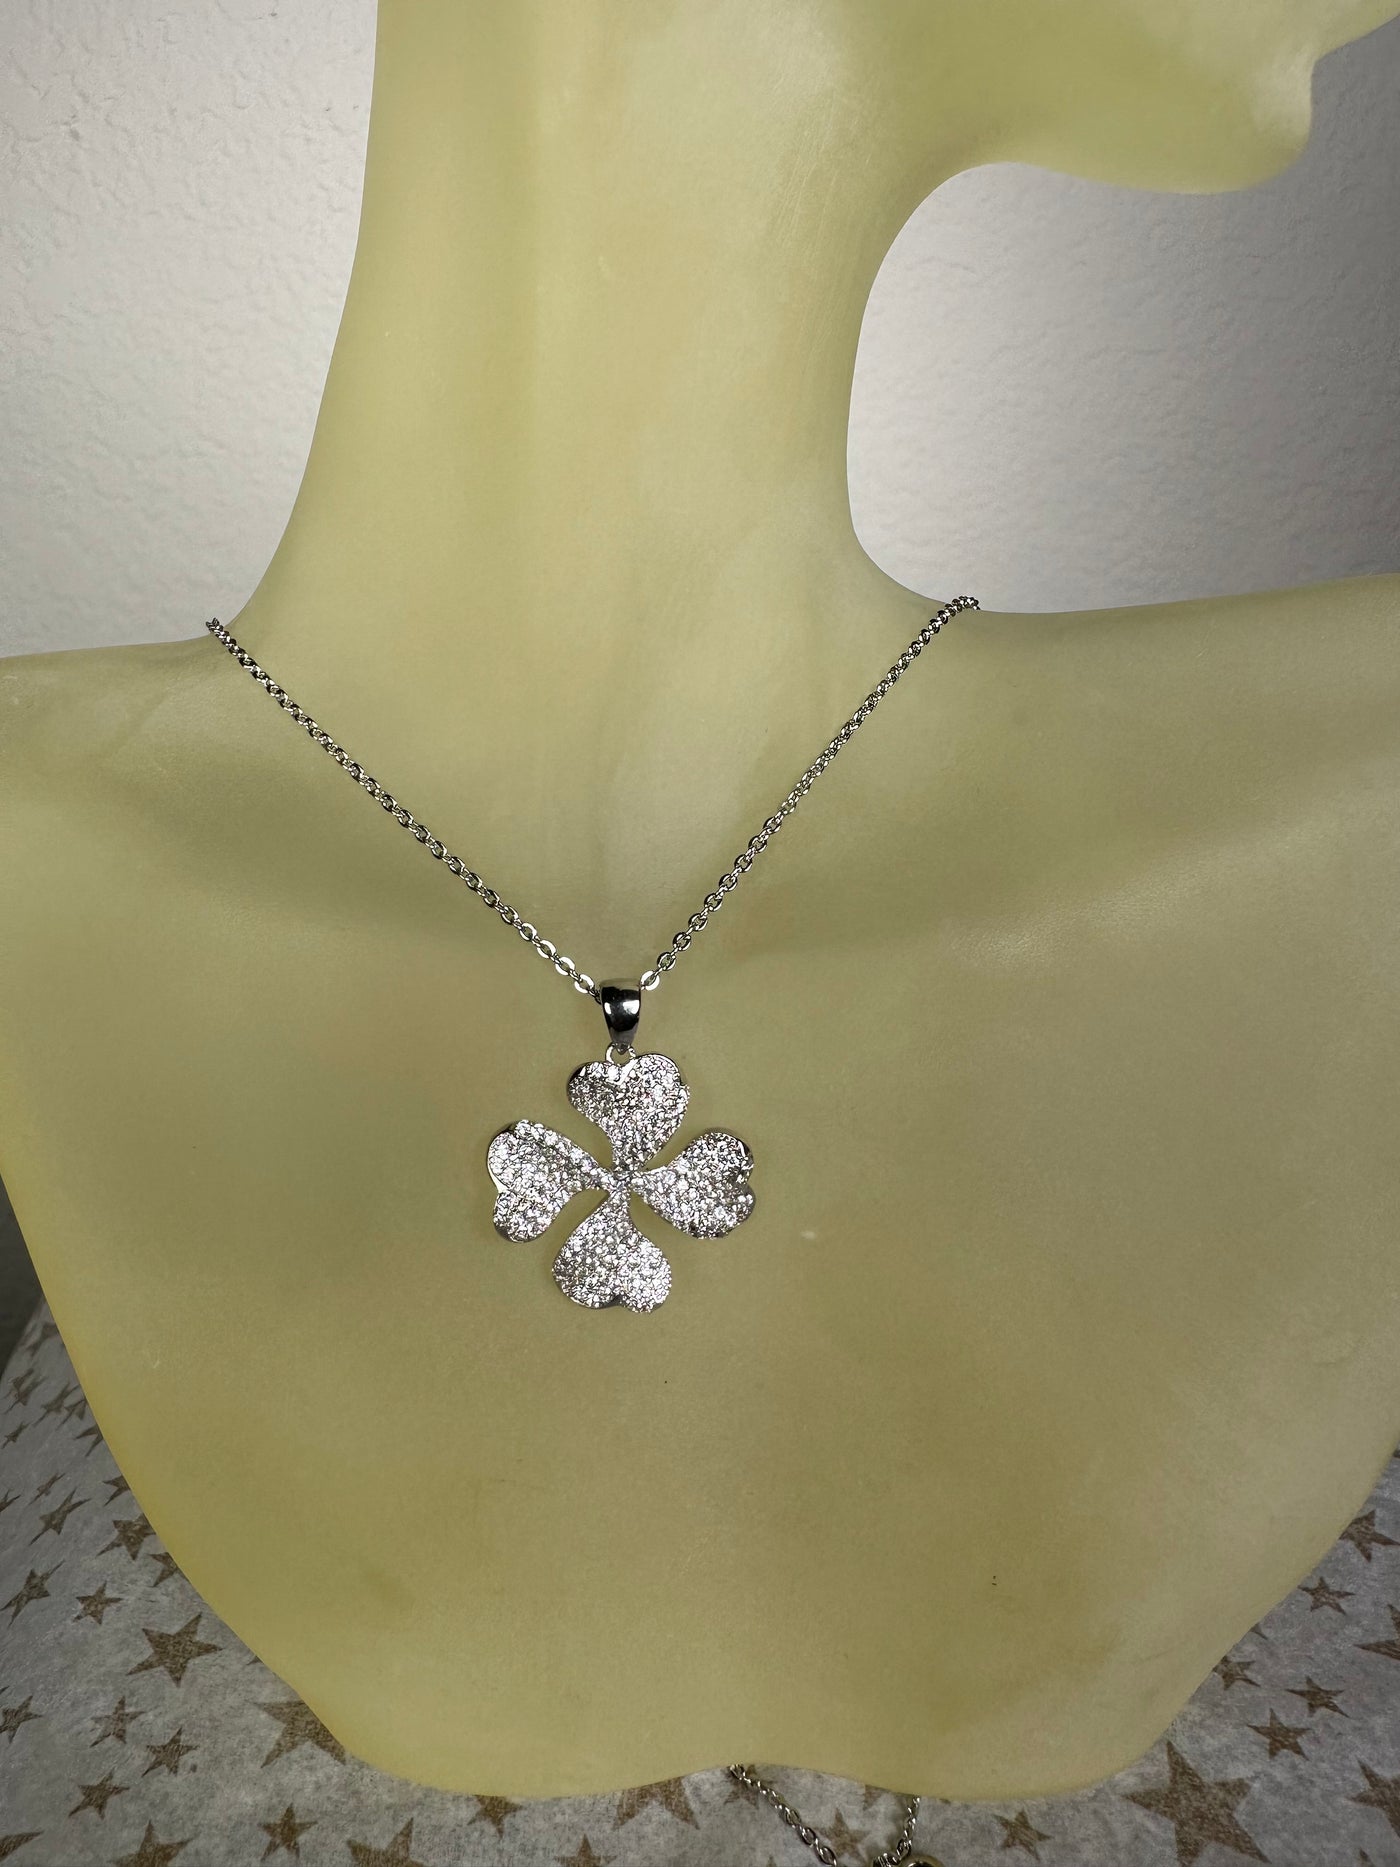 Pave Set Cubic Zirconia 4-leaf Clover Pendant in Silver, Yellow Gold and Rose Gold Tone